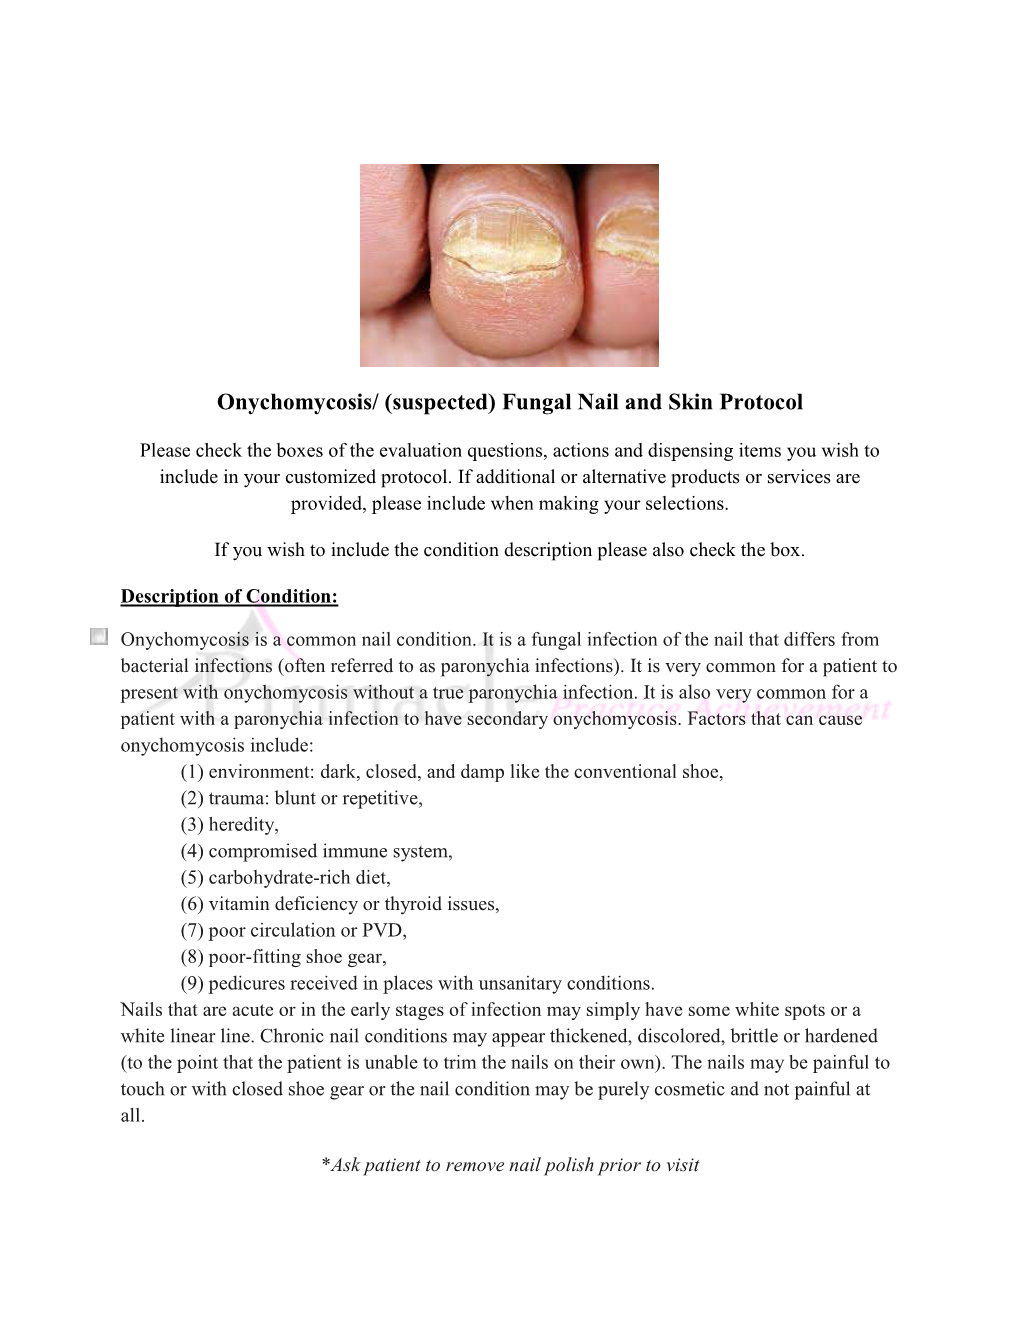 Onychomycosis/ (Suspected) Fungal Nail and Skin Protocol